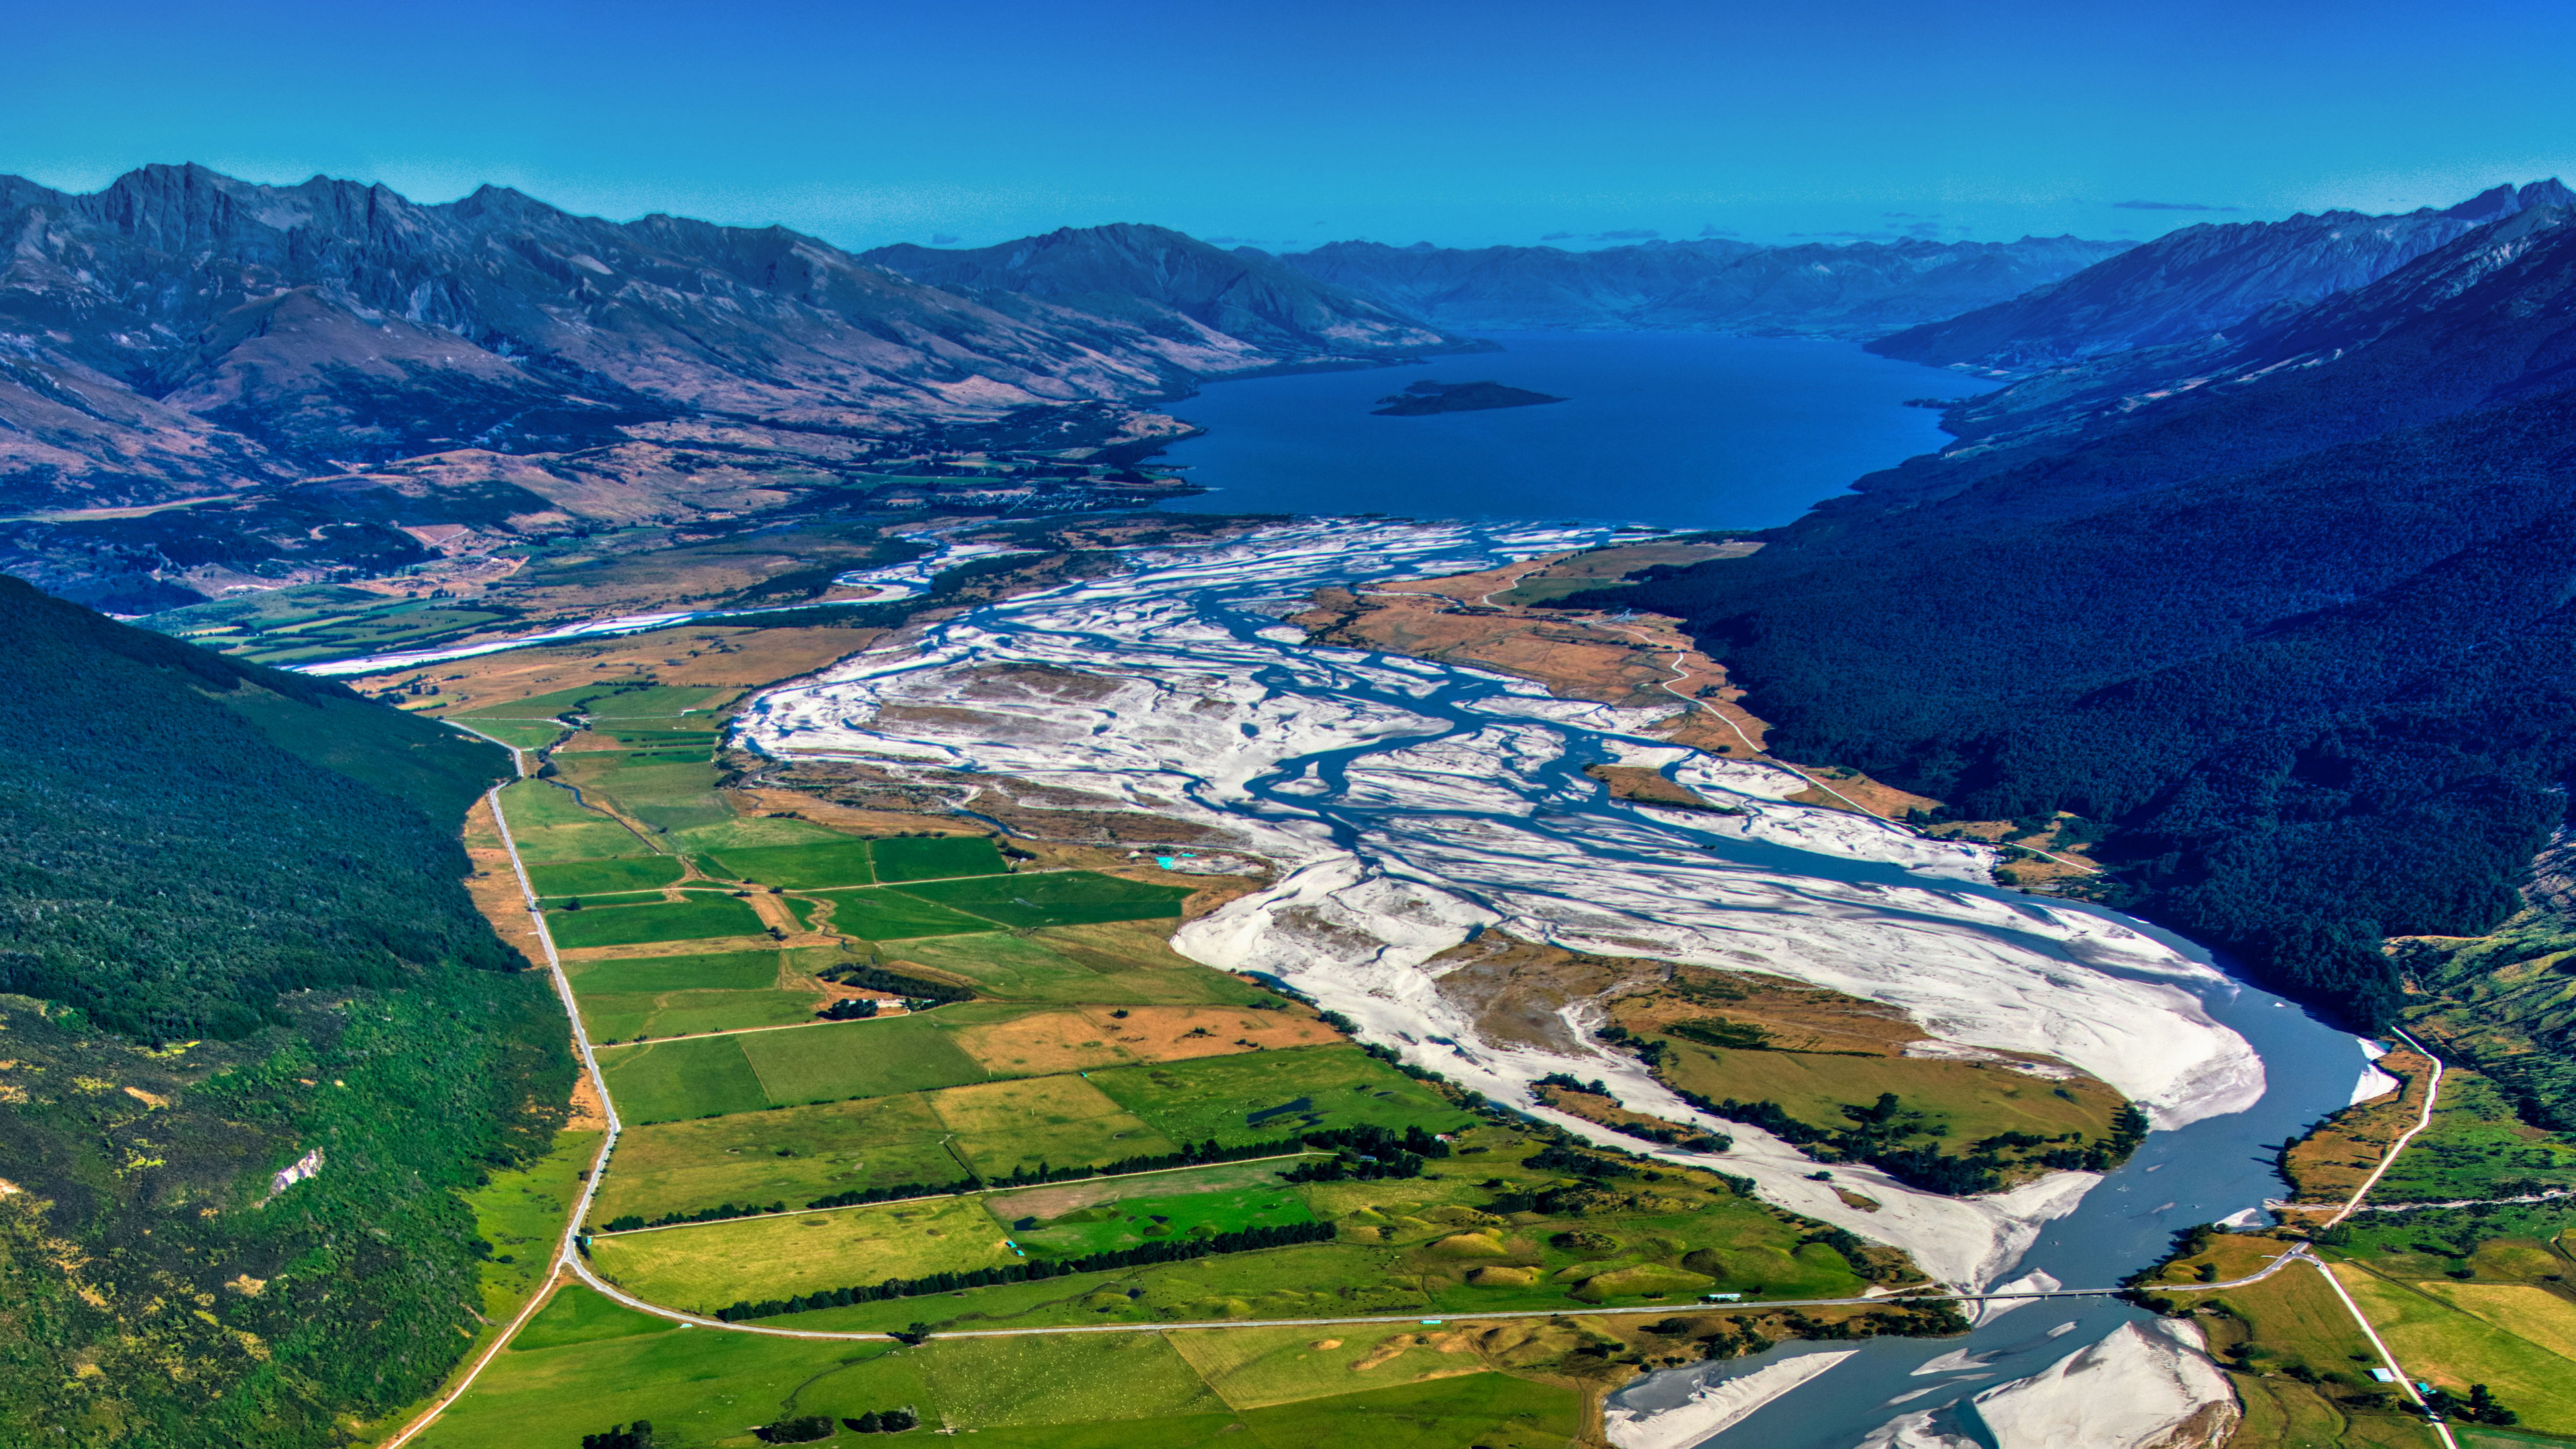 General 3840x2160 photography Trey Ratcliff landscape New Zealand aerial view field water mountains sky mountain chain panorama road valley Queenstown region 4K